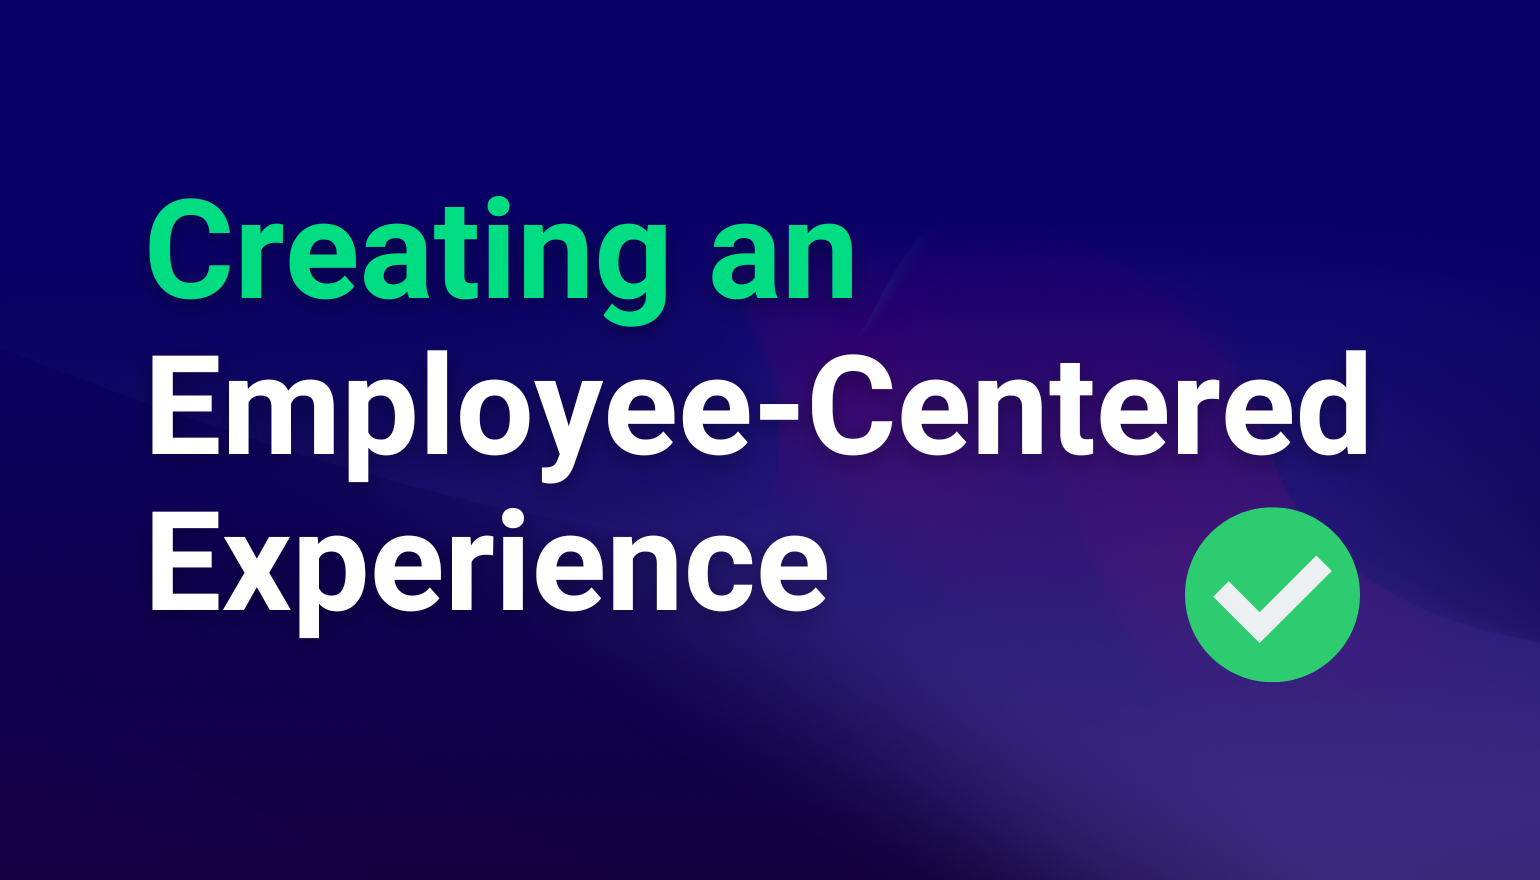 Creating an Employee-Centered Experience